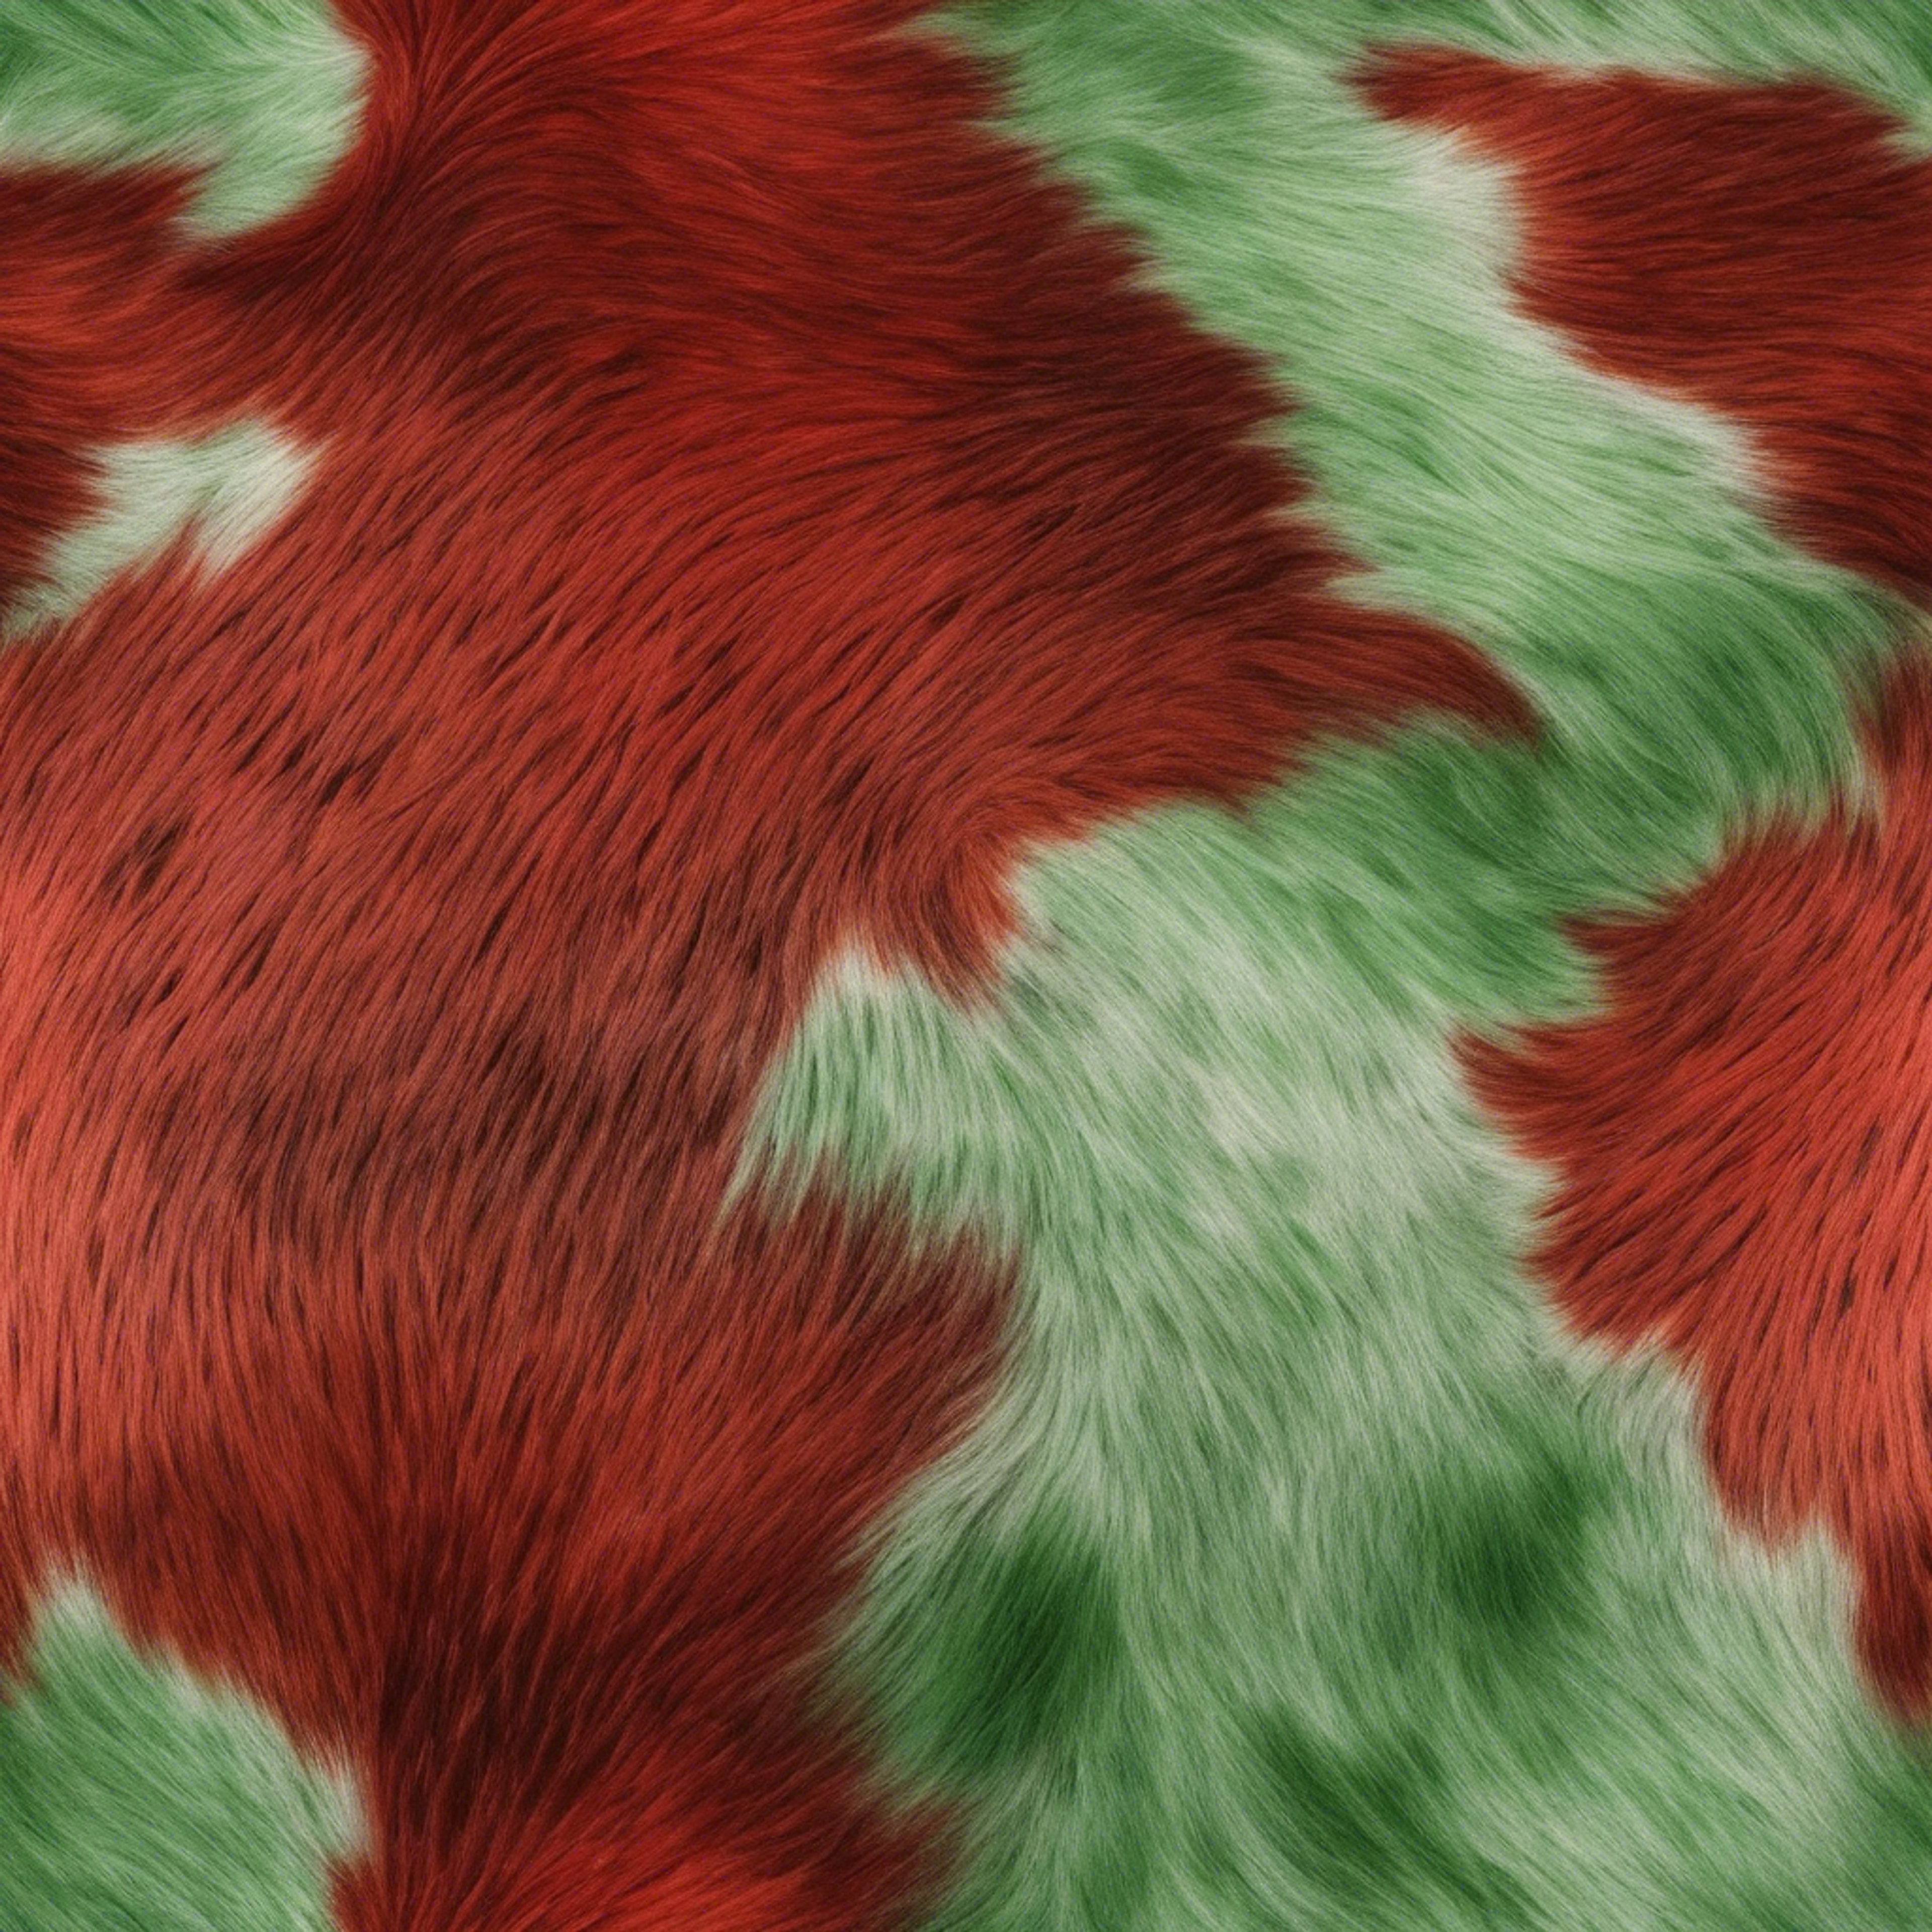 Seamless cowhide pattern art painted in bright red and green shades. Papel de parede[3aae93f0a1ee456daf96]